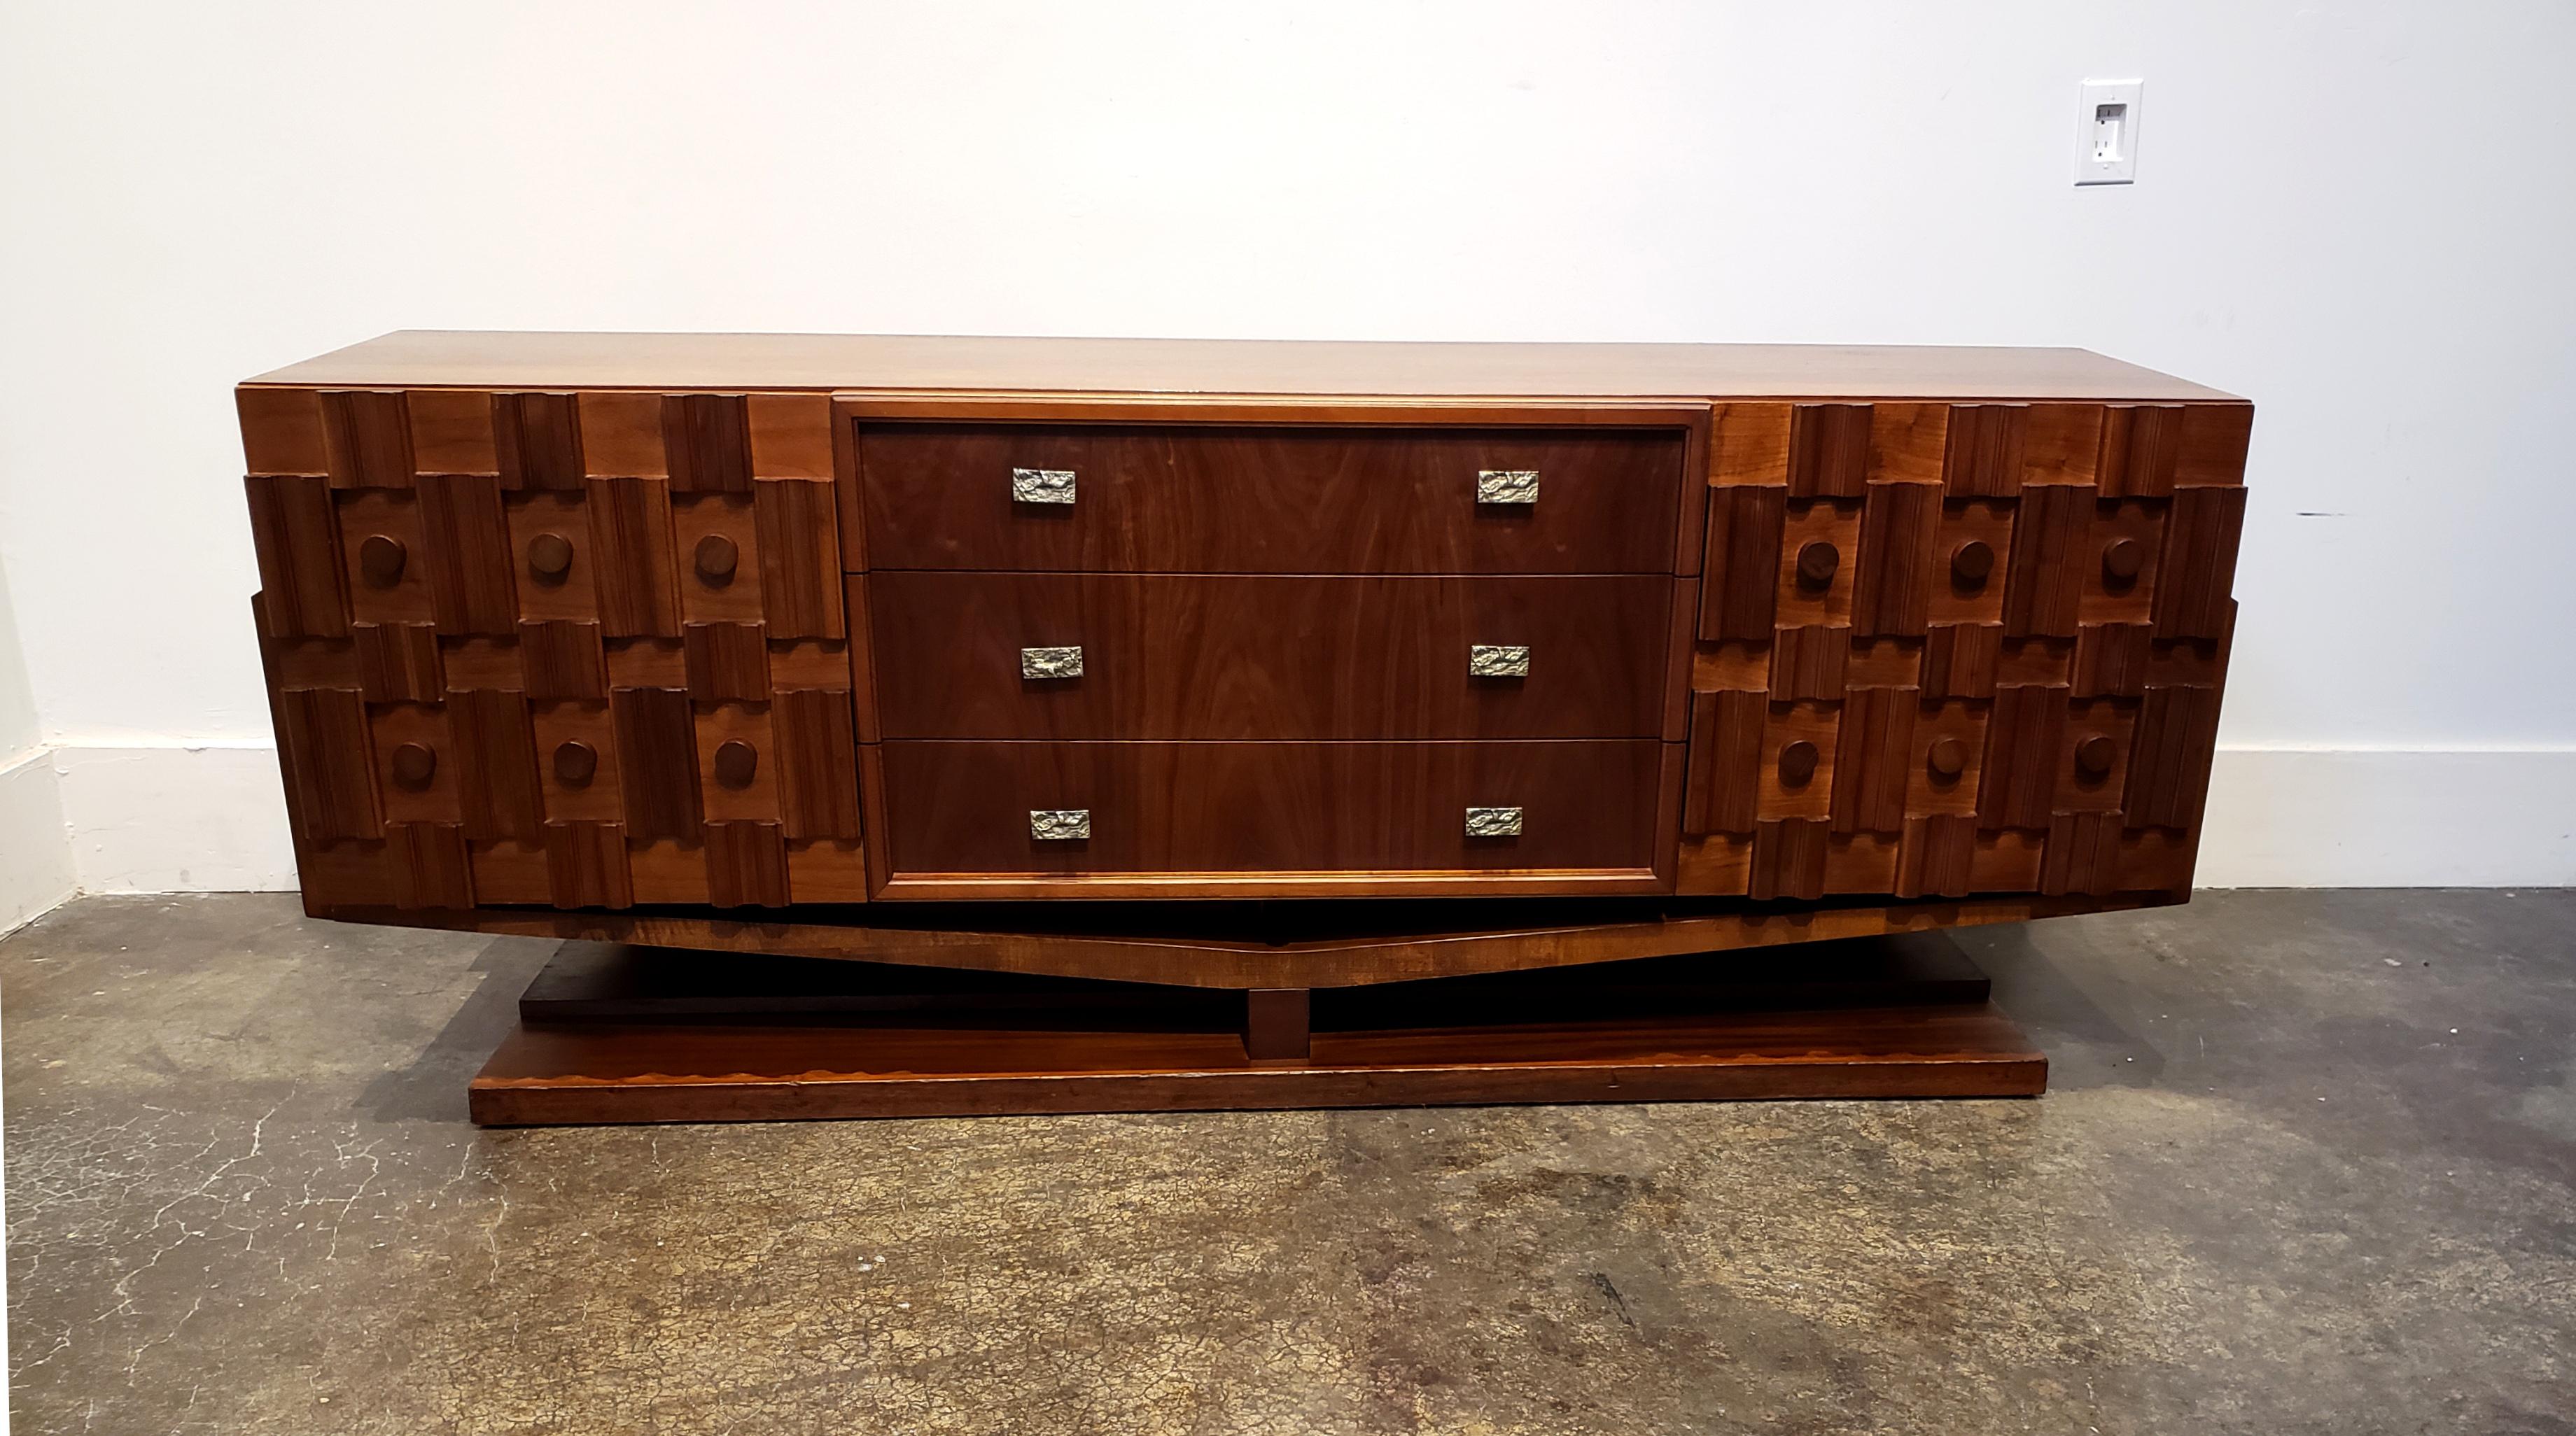 Beautifully-designed, Brutalist credenza raised on arched plinth with circular and beveled sculpted wood elements on side cabinet doors. Three large central drawers in warm walnut wood with cast iron Brutalist pulls. Side cabinets also have 3 small